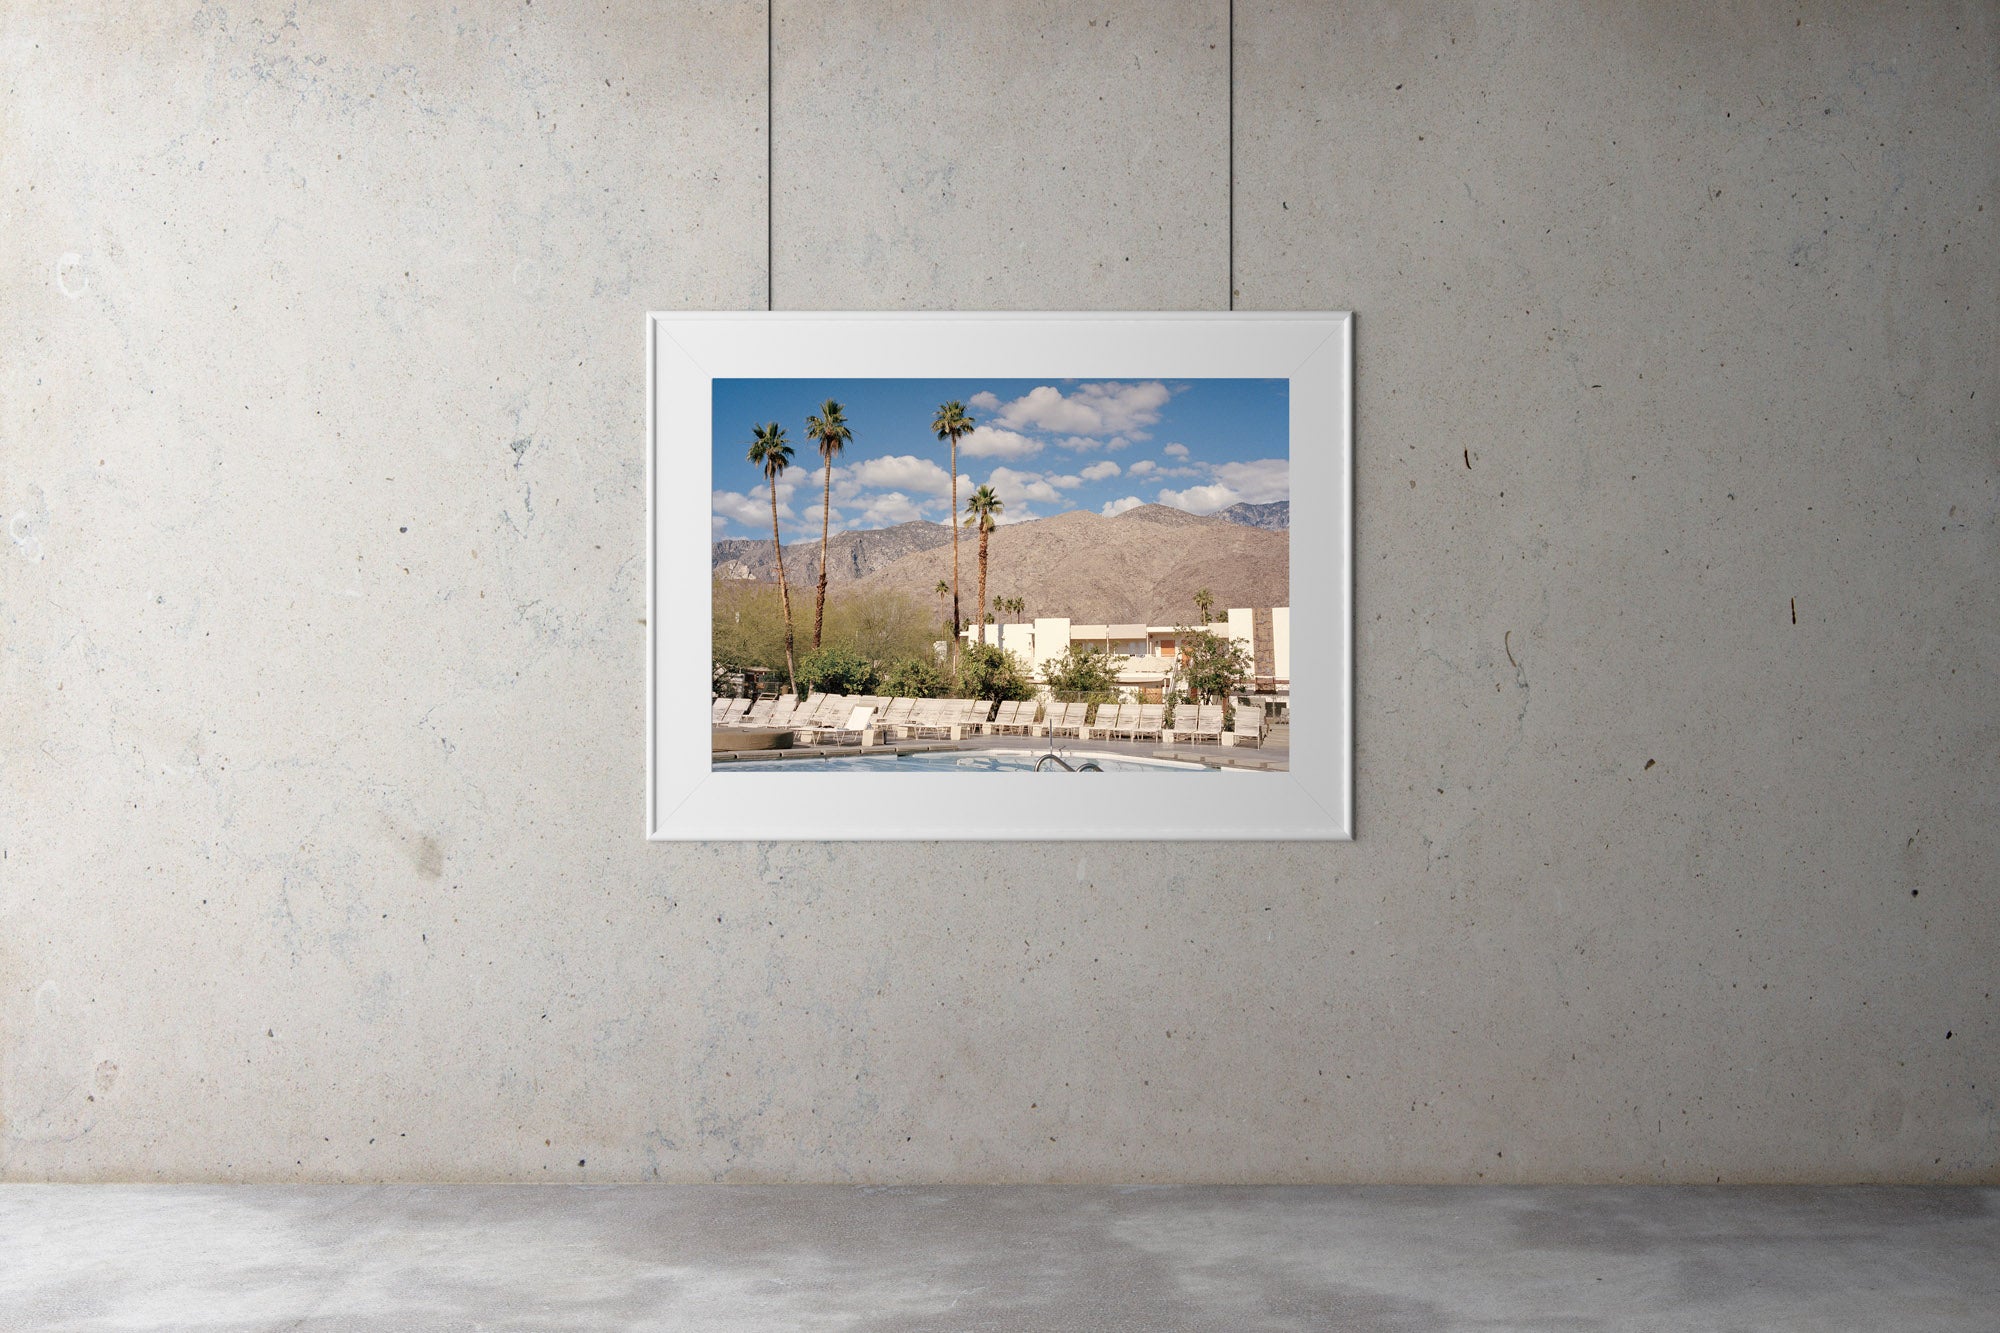 A photograph of a swimming pool looking out on palm trees & large mountains. Blue skies & clouds, Palm tree, USA, Artwork, Prints, wall art, California, Photographic prints, Ocean Palm Springs, Framed artwork, Photography,  Film photography, Vintage photo style,  Interior design, beach, buy Art, photography art, buy art, ace hotel, Prints for sale, art prints, colour photography, surfing, surfboard, Malibu, Malibu,  surfing, sun, beach, sun baking, mid century